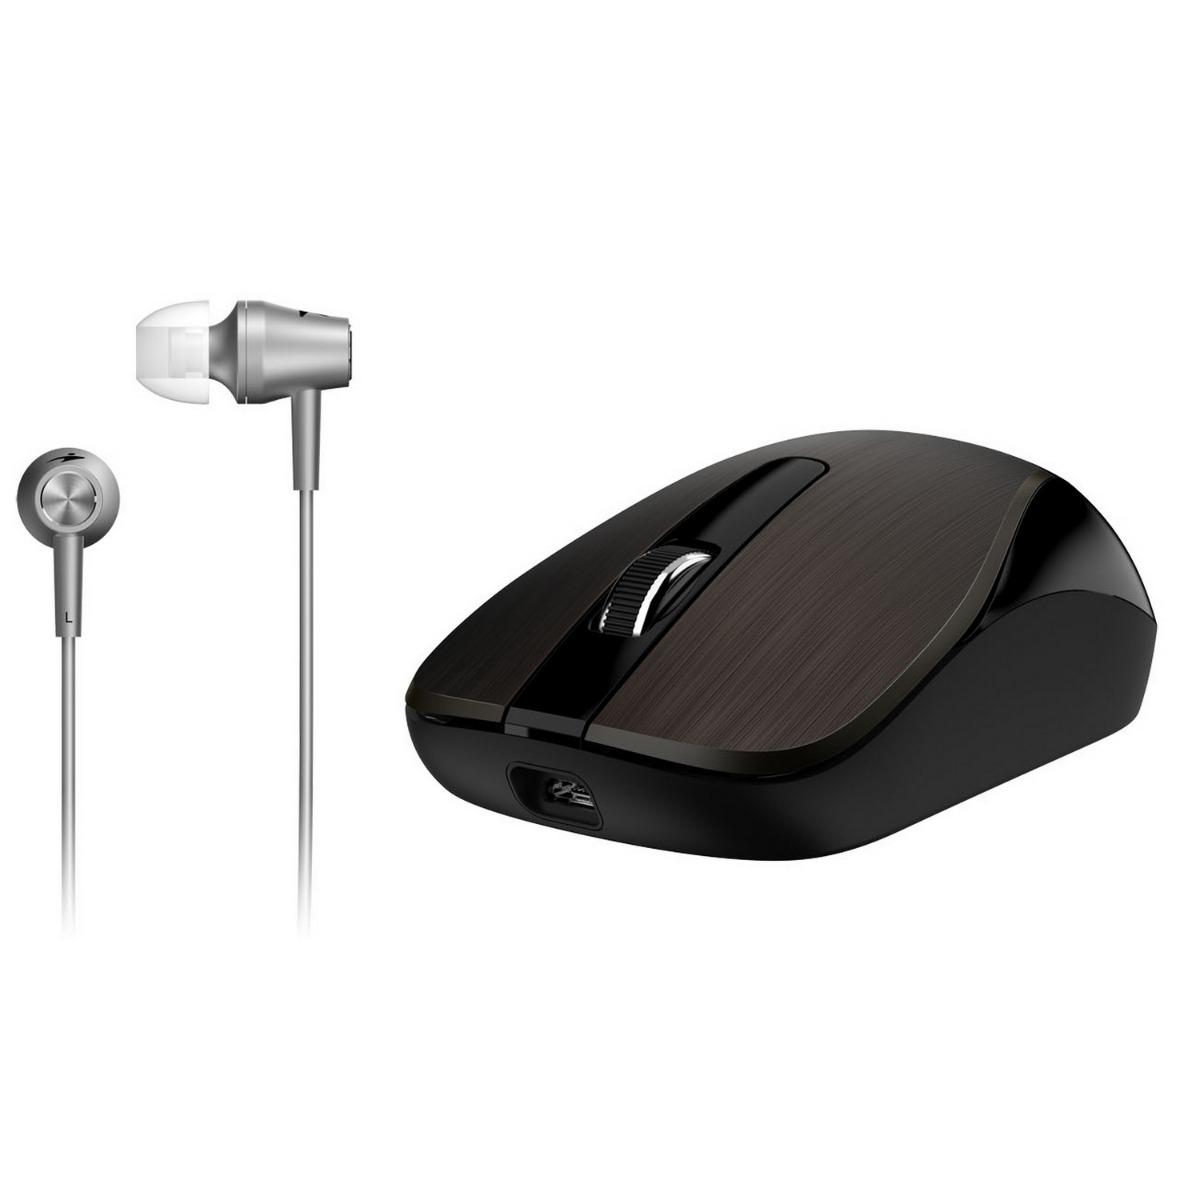 Genius Wireless Mouse + In-Ear Wire Headphone (Chocolate) MH-8015